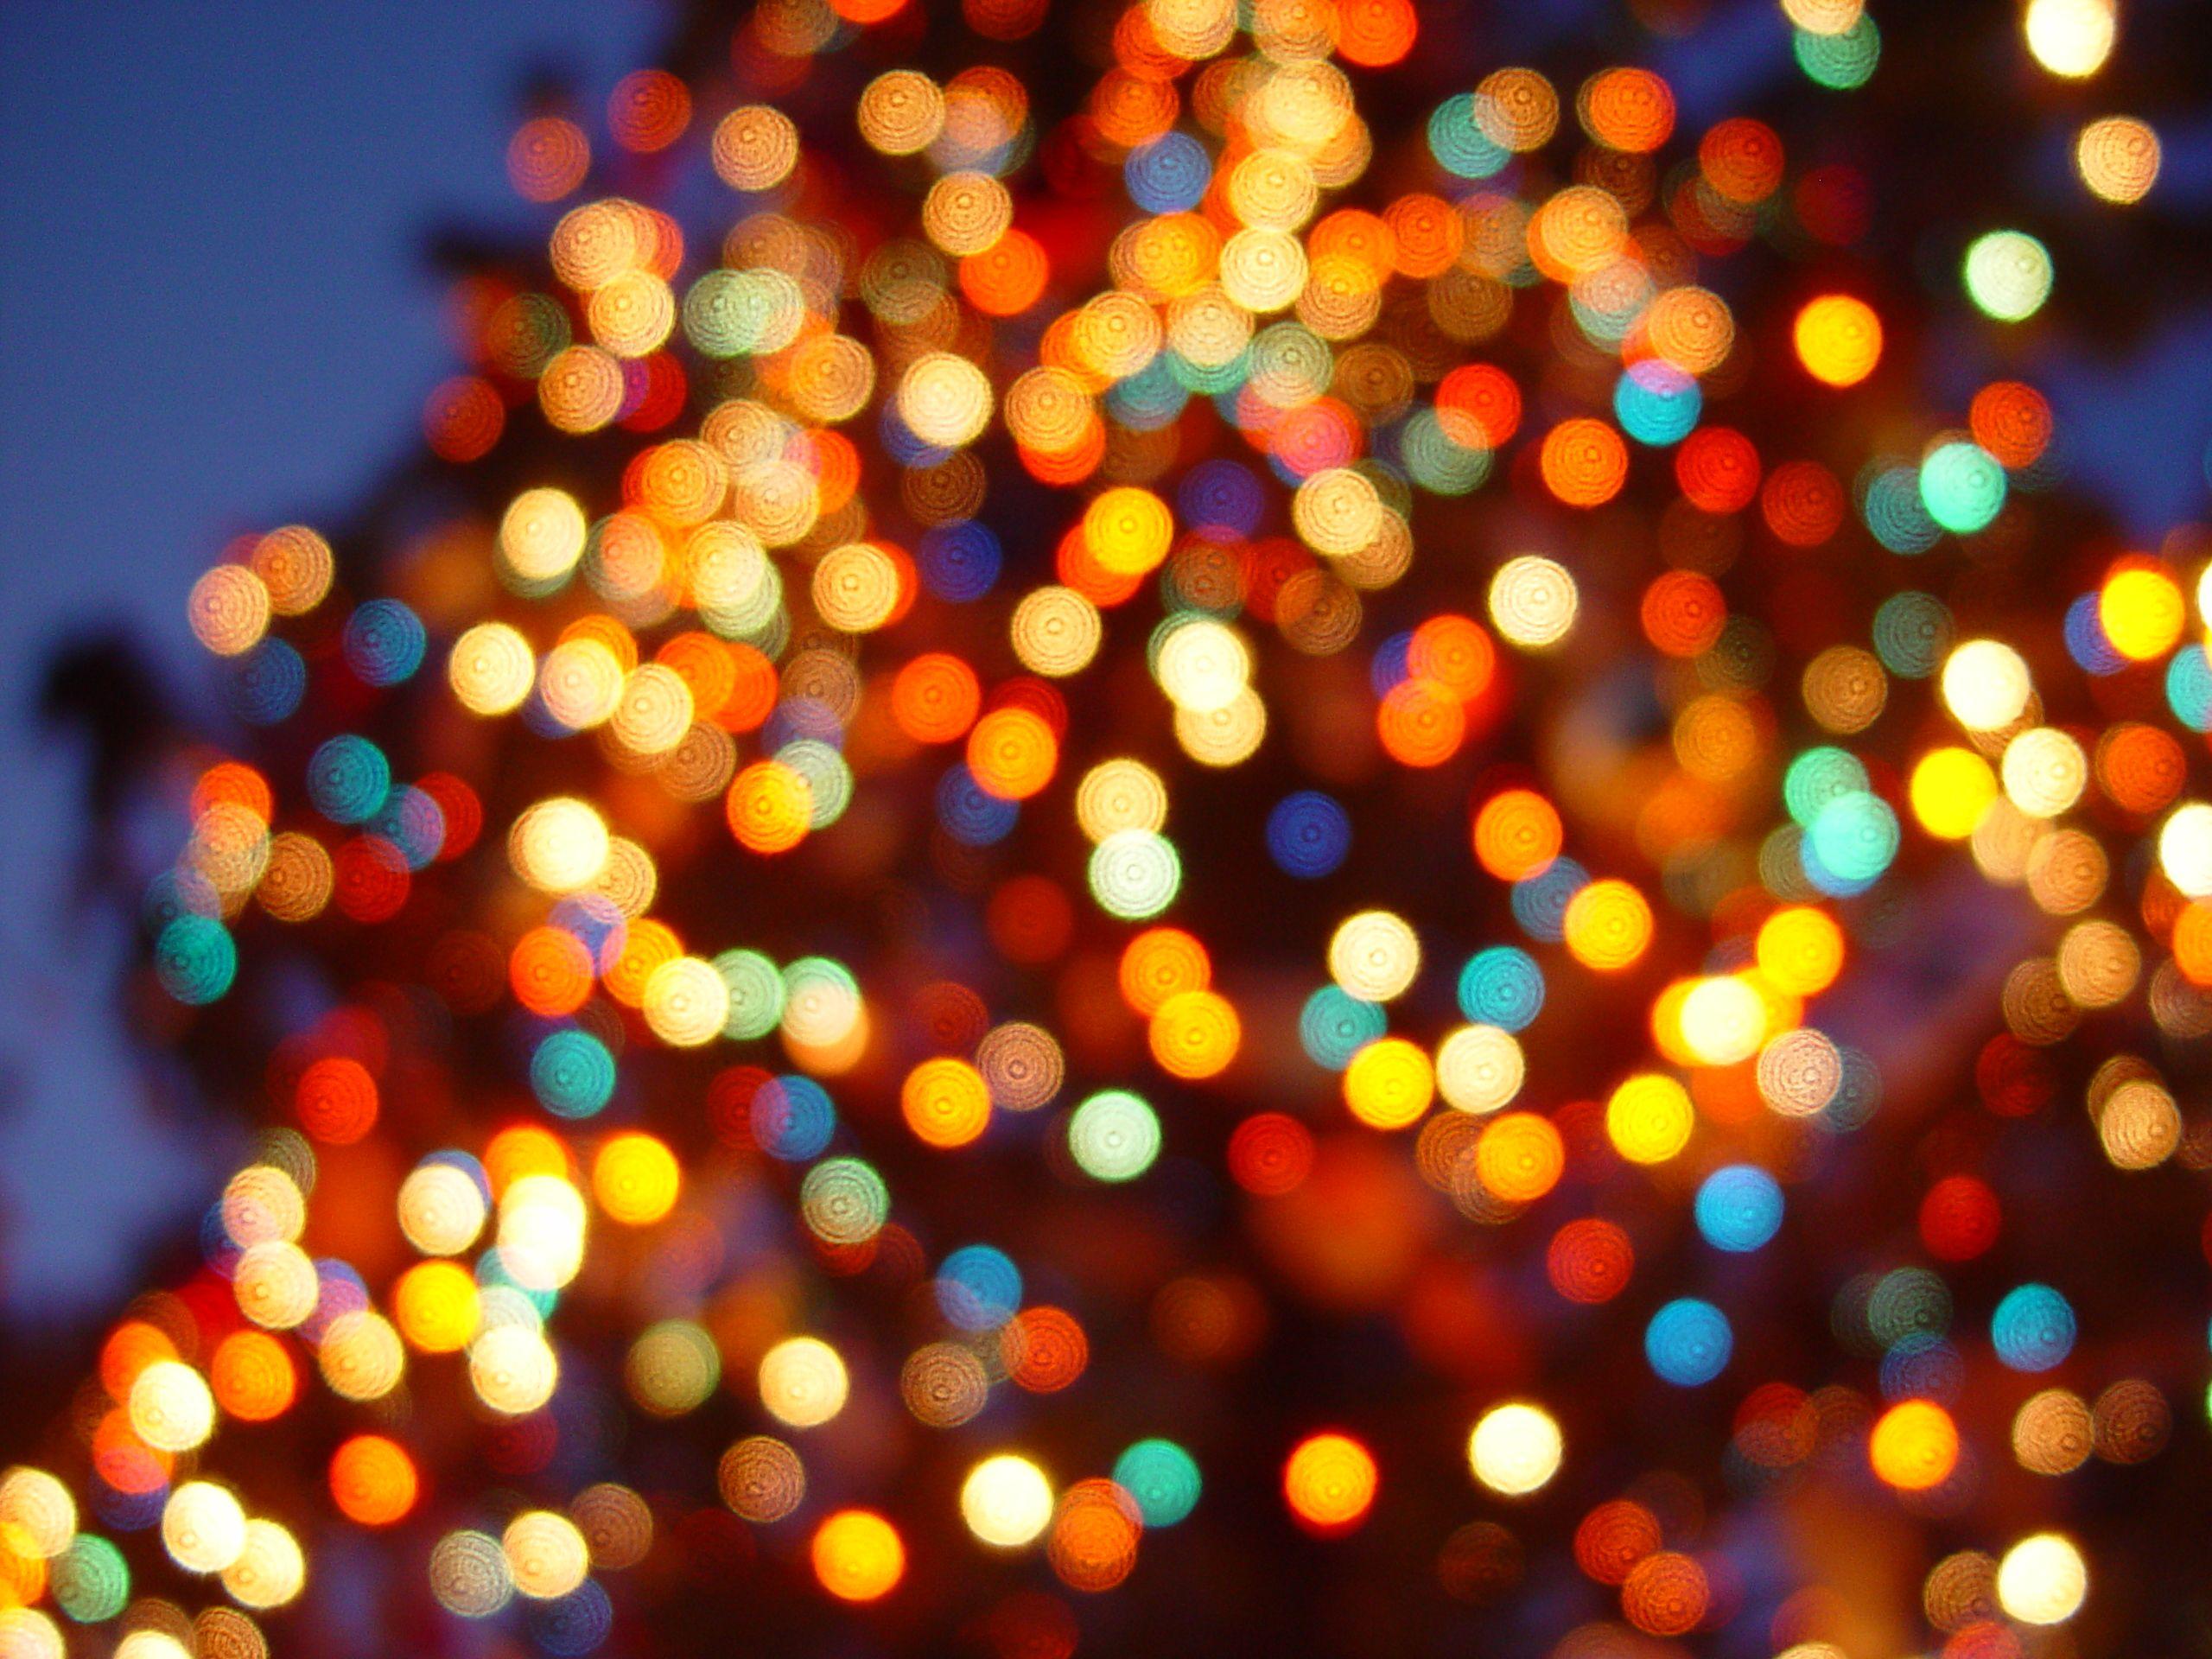 From Candle to LED: A Short History of Christmas LED Lights